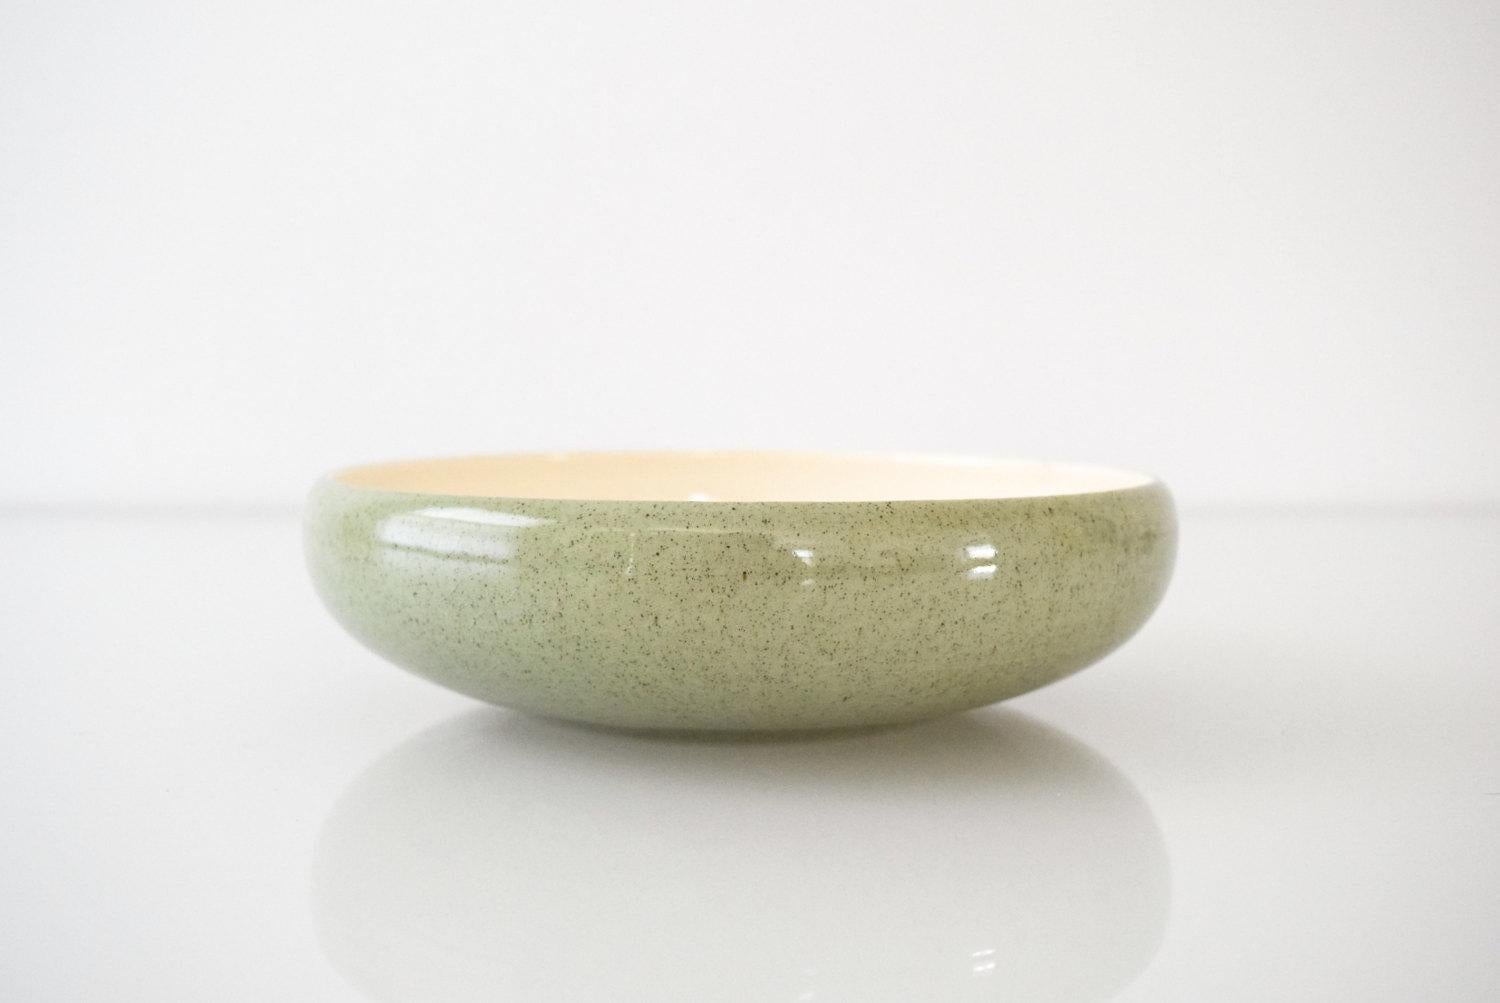 • Vintage Mid-Century Modern small ceramic bowl.
• Simple modernist design with a pretty shape, shallow profile and gentle curved edge.
• Pale sage exterior with tiny black speckles and bone interior.

Dimensions
Diameter: 7 1/2